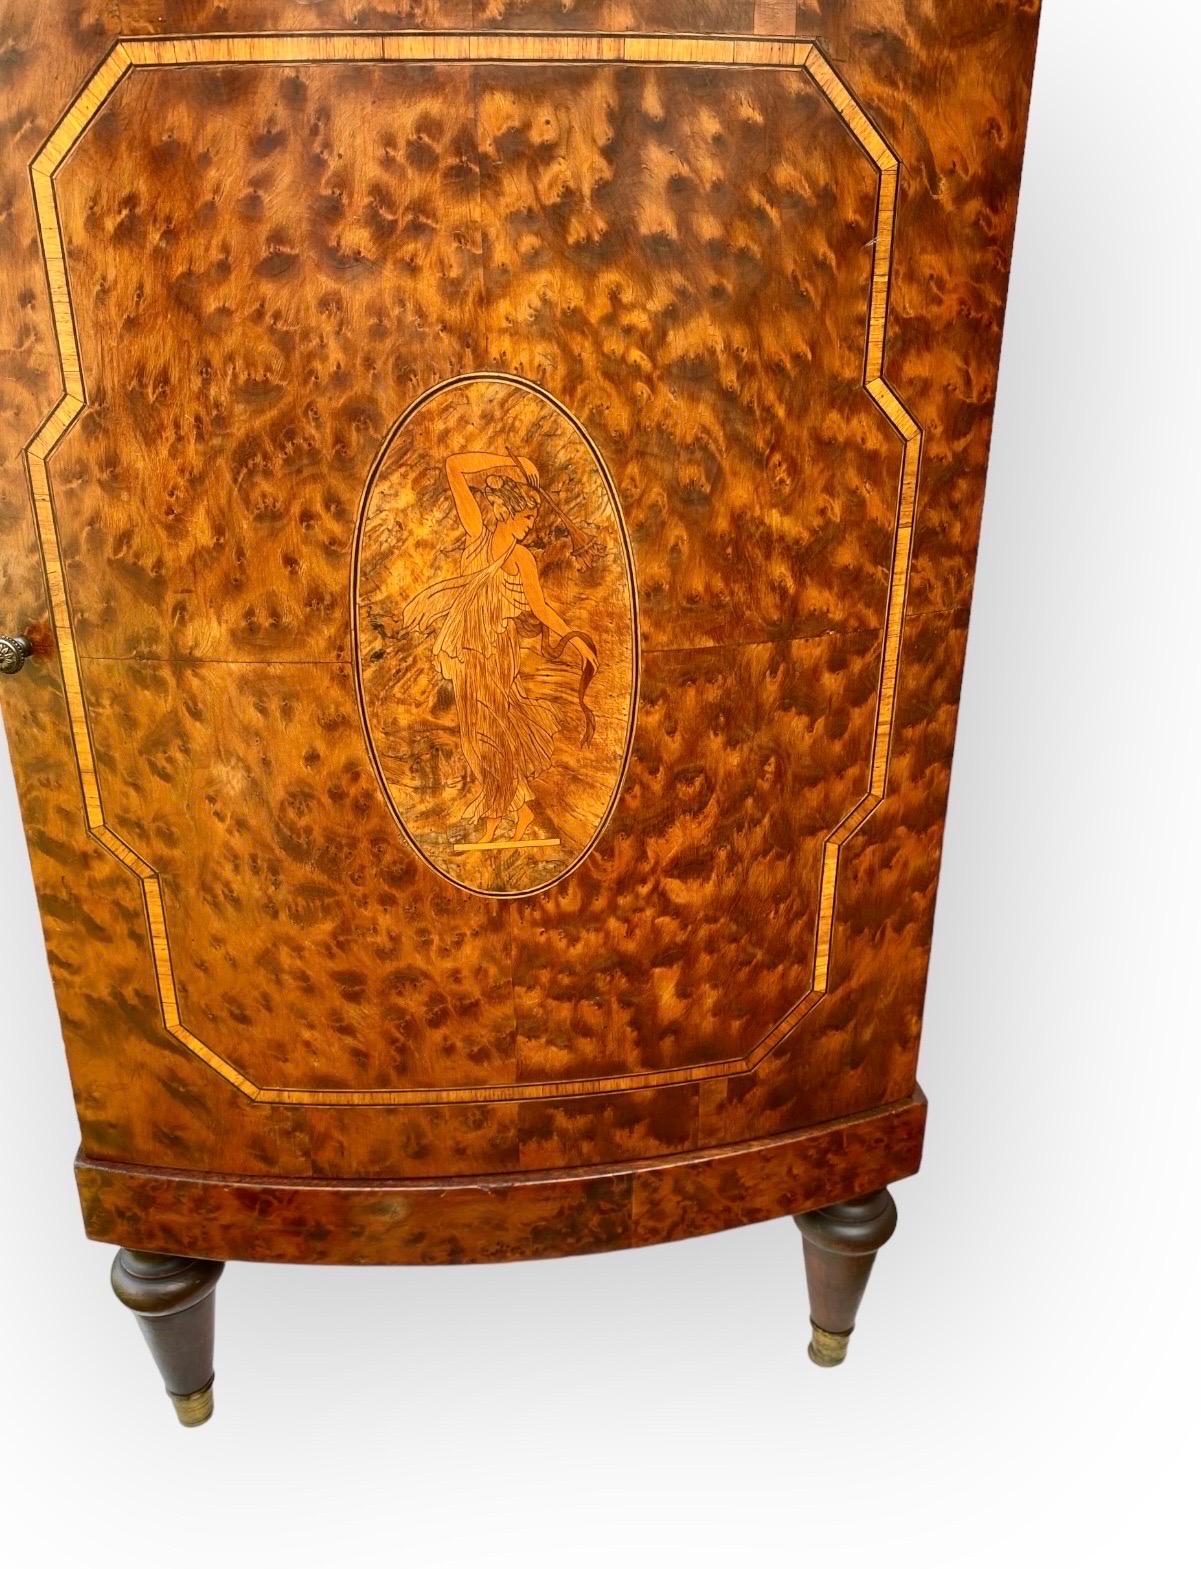 A handsome antique French Beaux Arts burl wood and exotic inlaid woods cabinet with a bowed, fixed marble top, a single bowed drawer and a single bowed door opening to a shelf and a marble lined compartment. The bowed door with a central marquetry